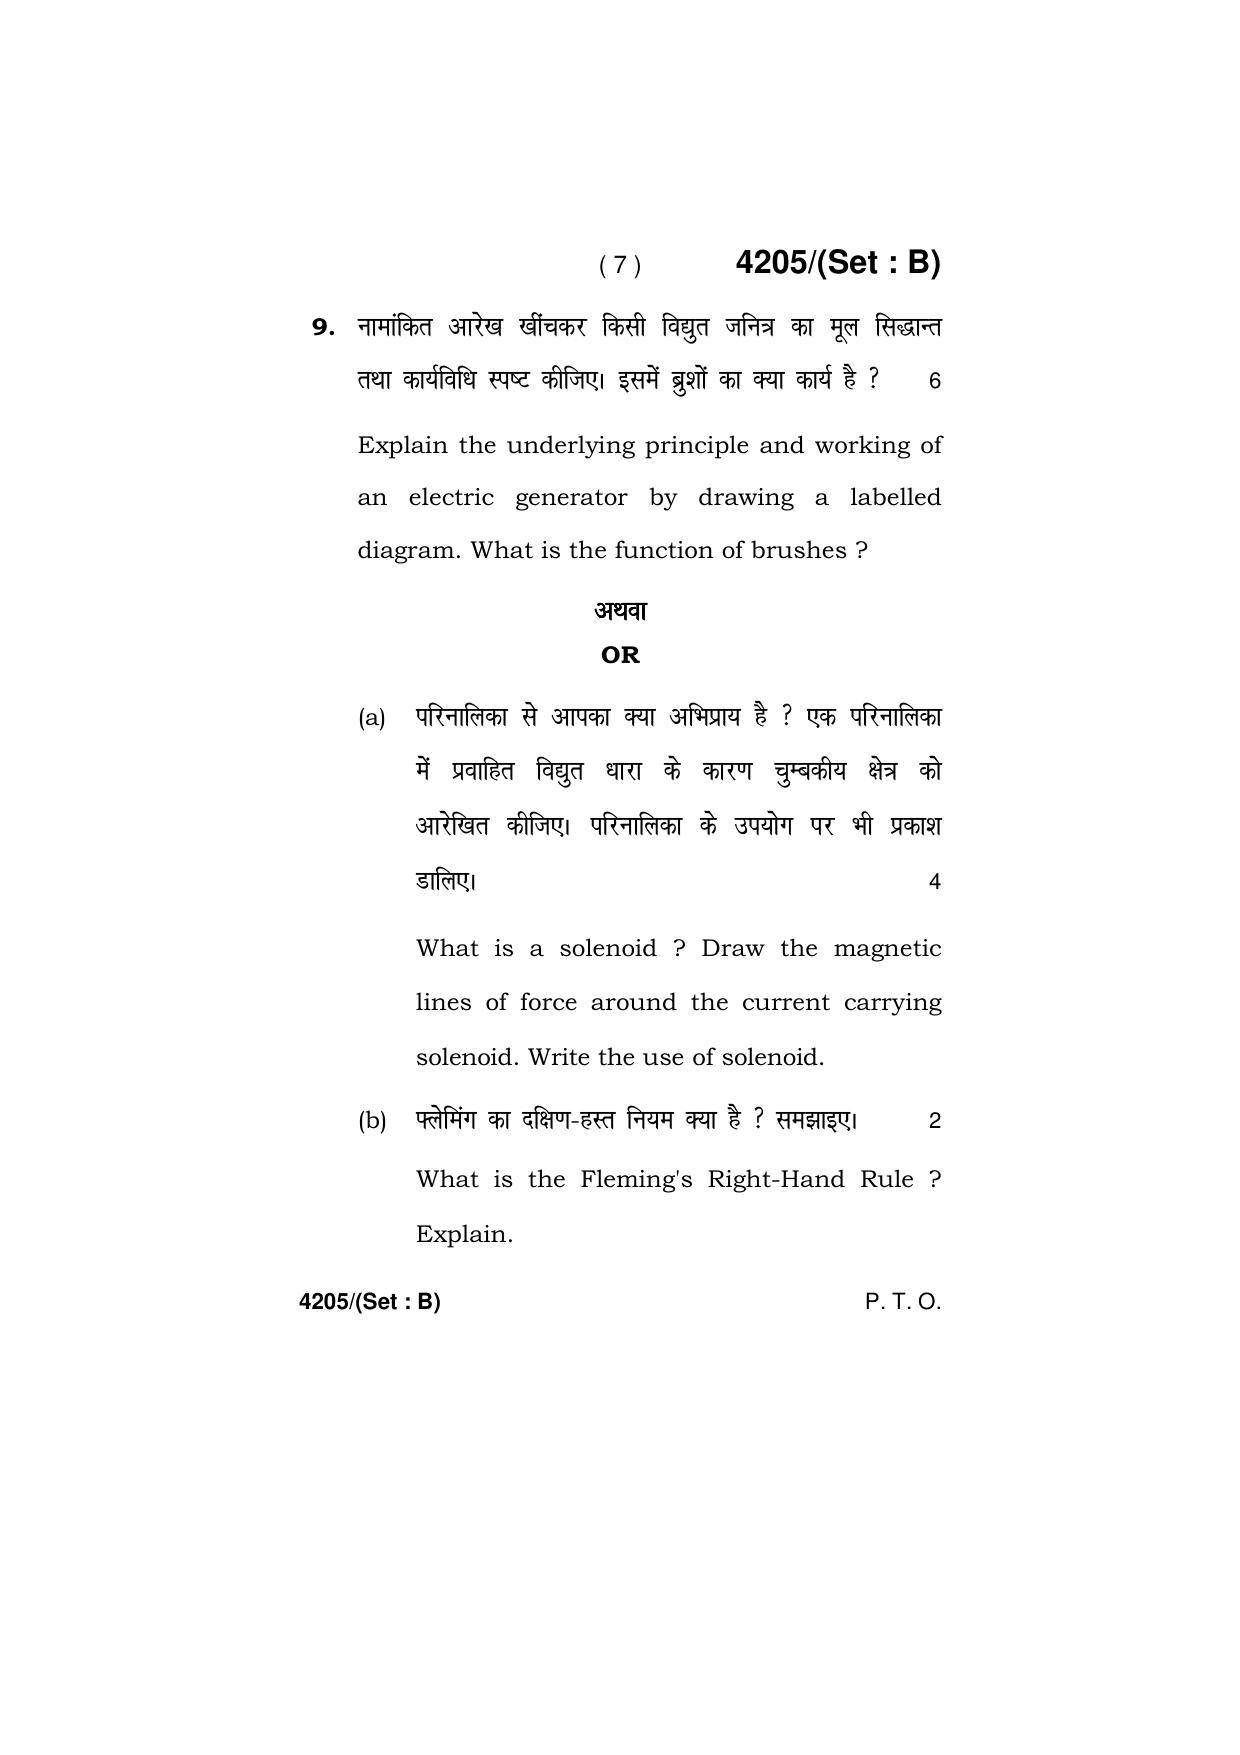 Haryana Board HBSE Class 10 Science (All Set) 2019 Question Paper - Page 23